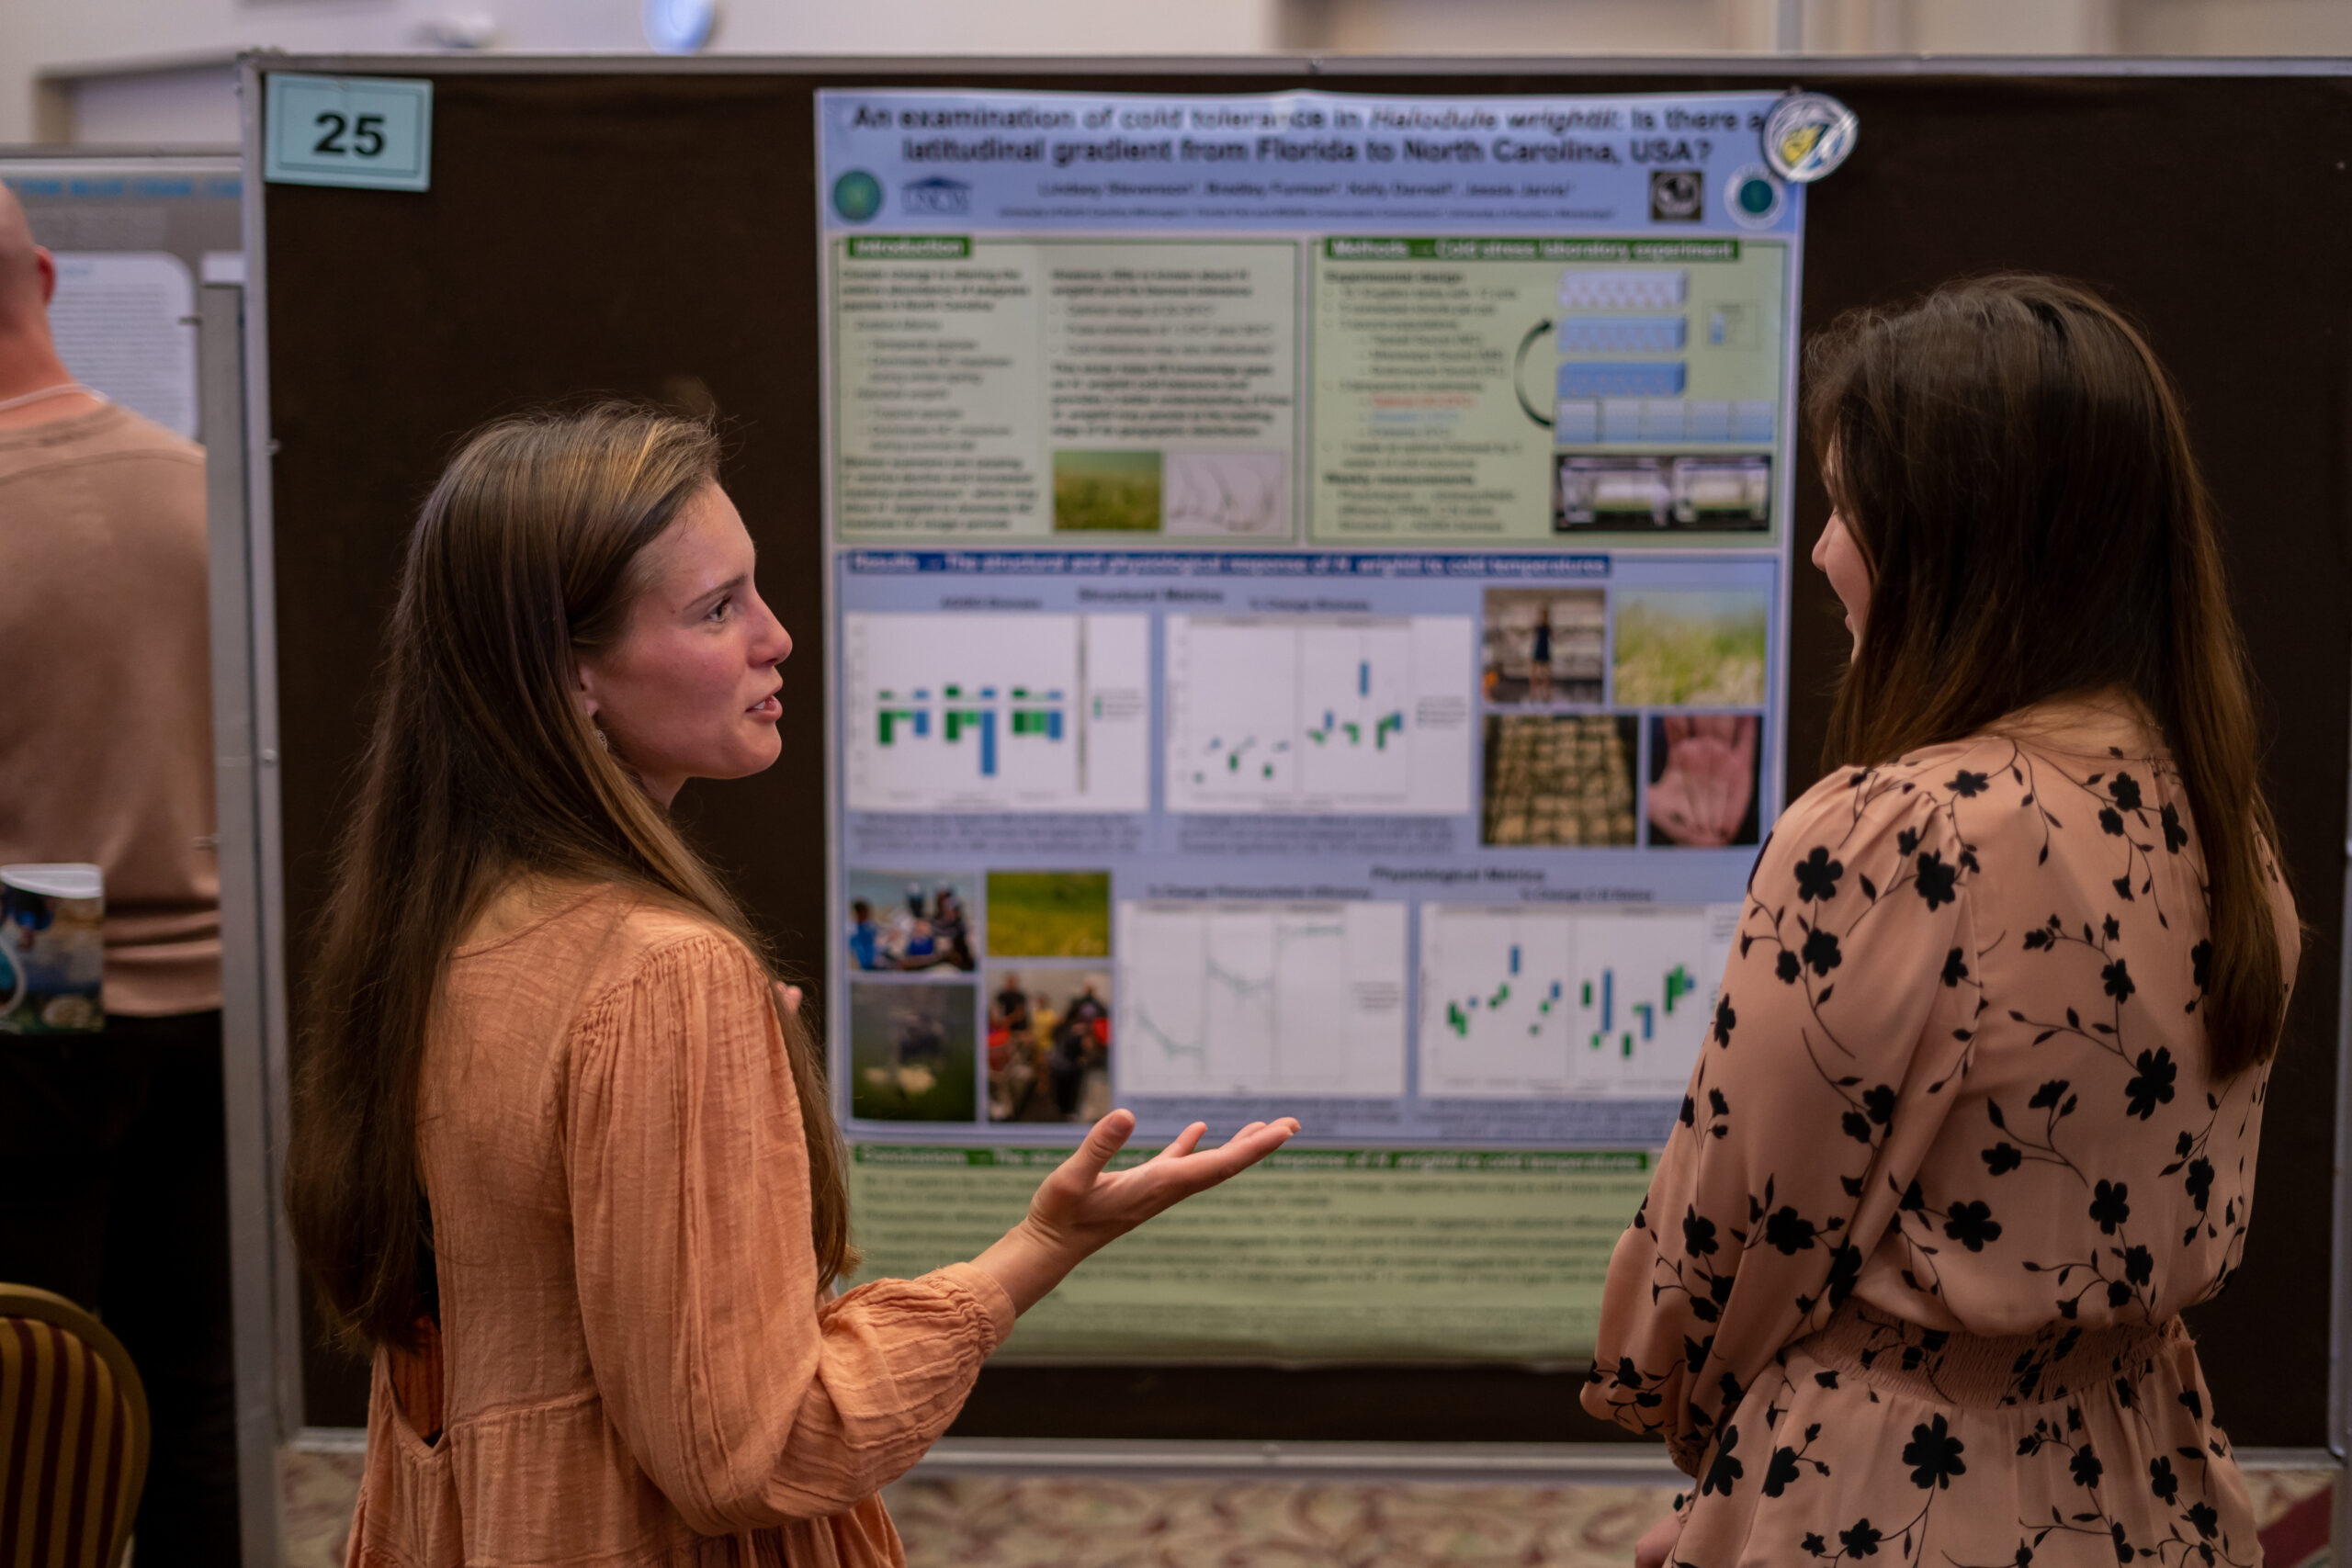 Lindsey Stevenson talking to a woman about her research while standing in front of her poster